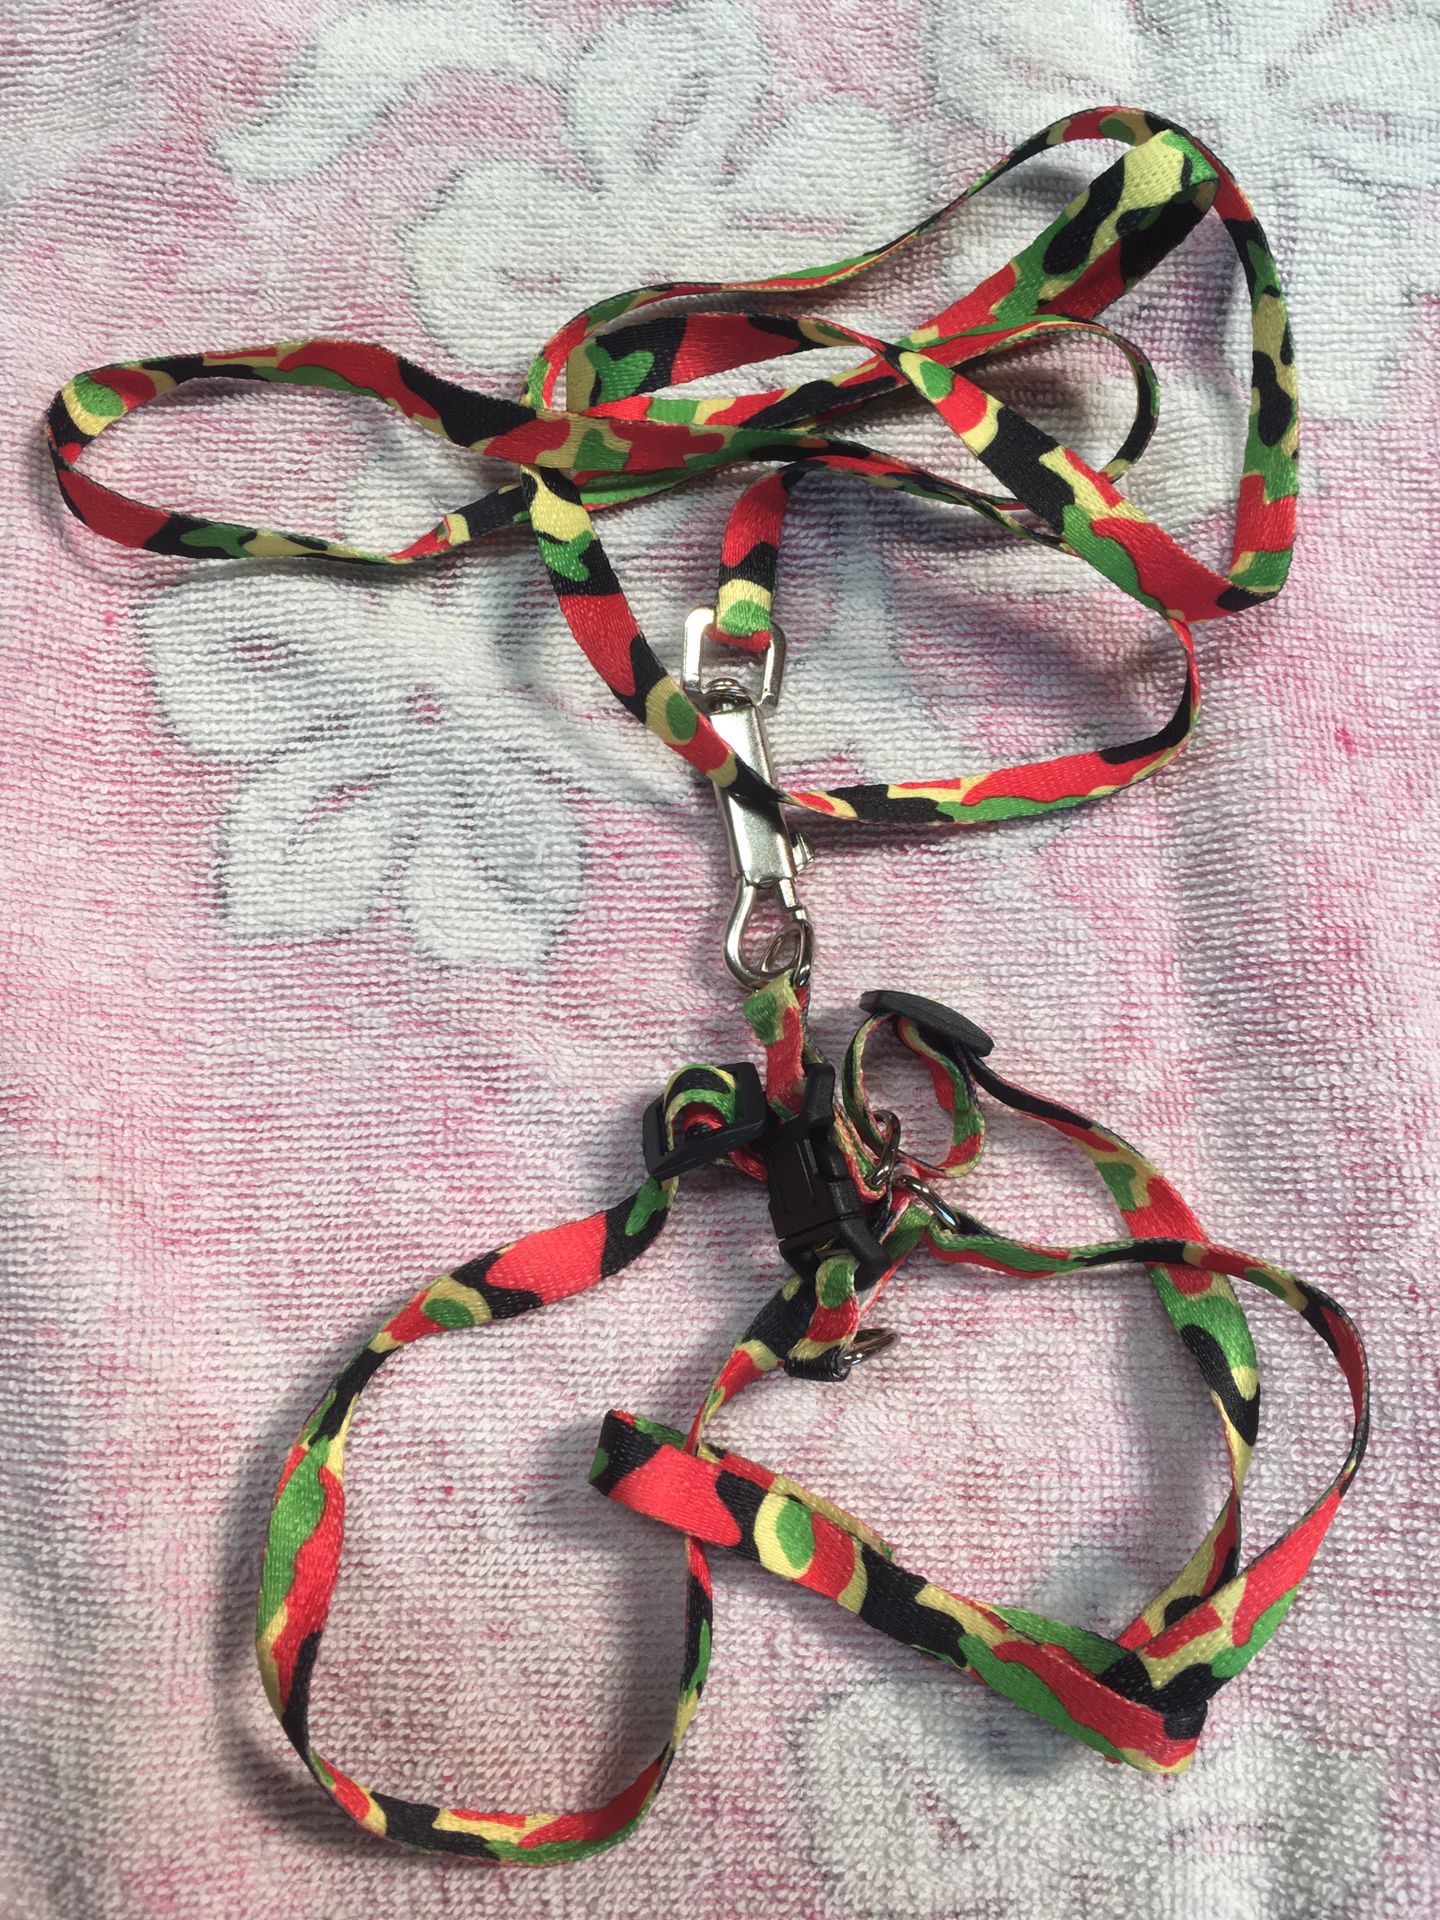 Small Dog Or Cat Harness 6 Colors To Choose From $5 Each NIP